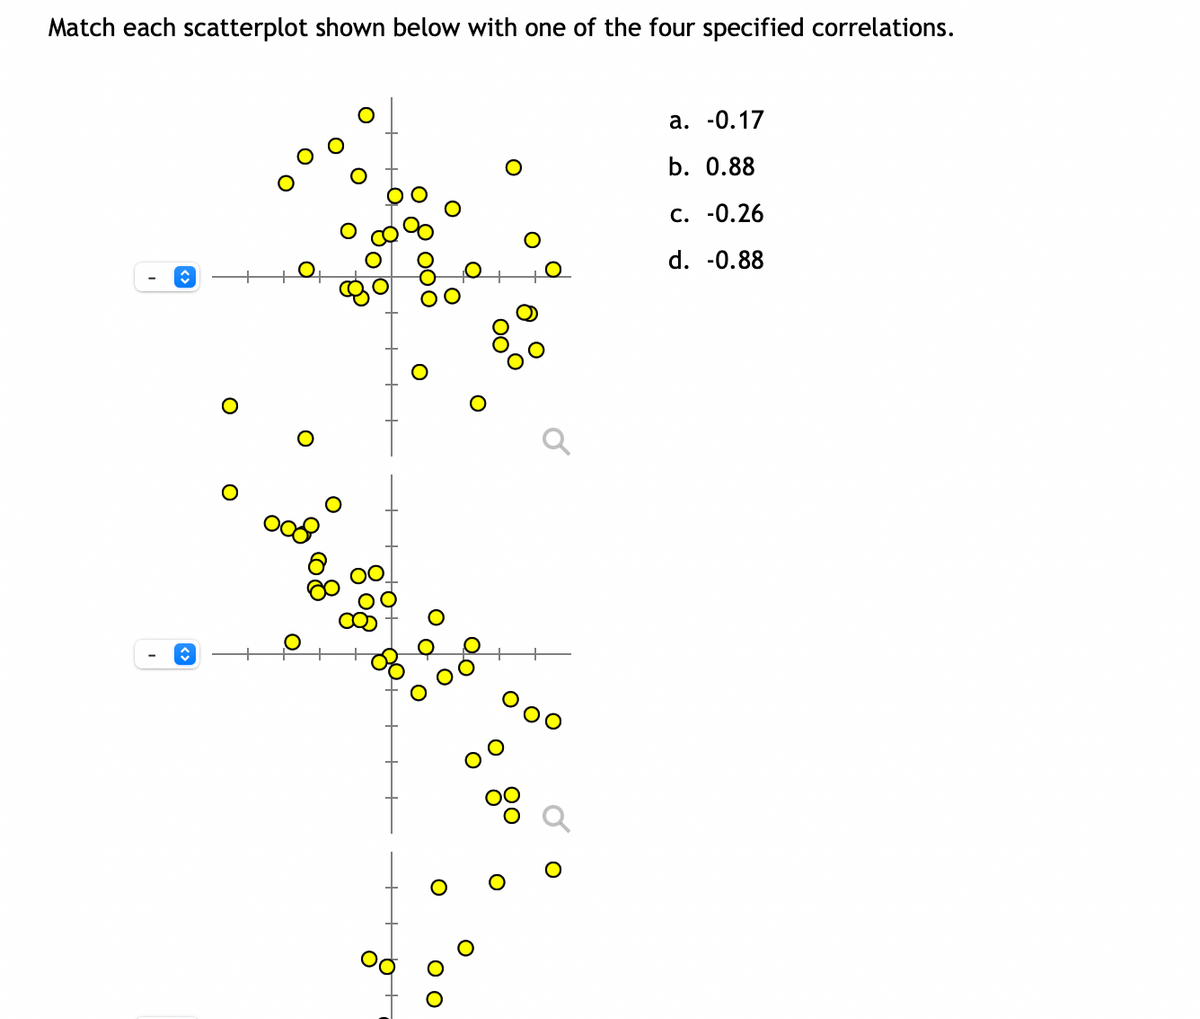 Match each scatterplot shown below with one of the four specified correlations.
,
ŵ
*
88
8
a. -0.17
b. 0.88
c. -0.26
d. -0.88